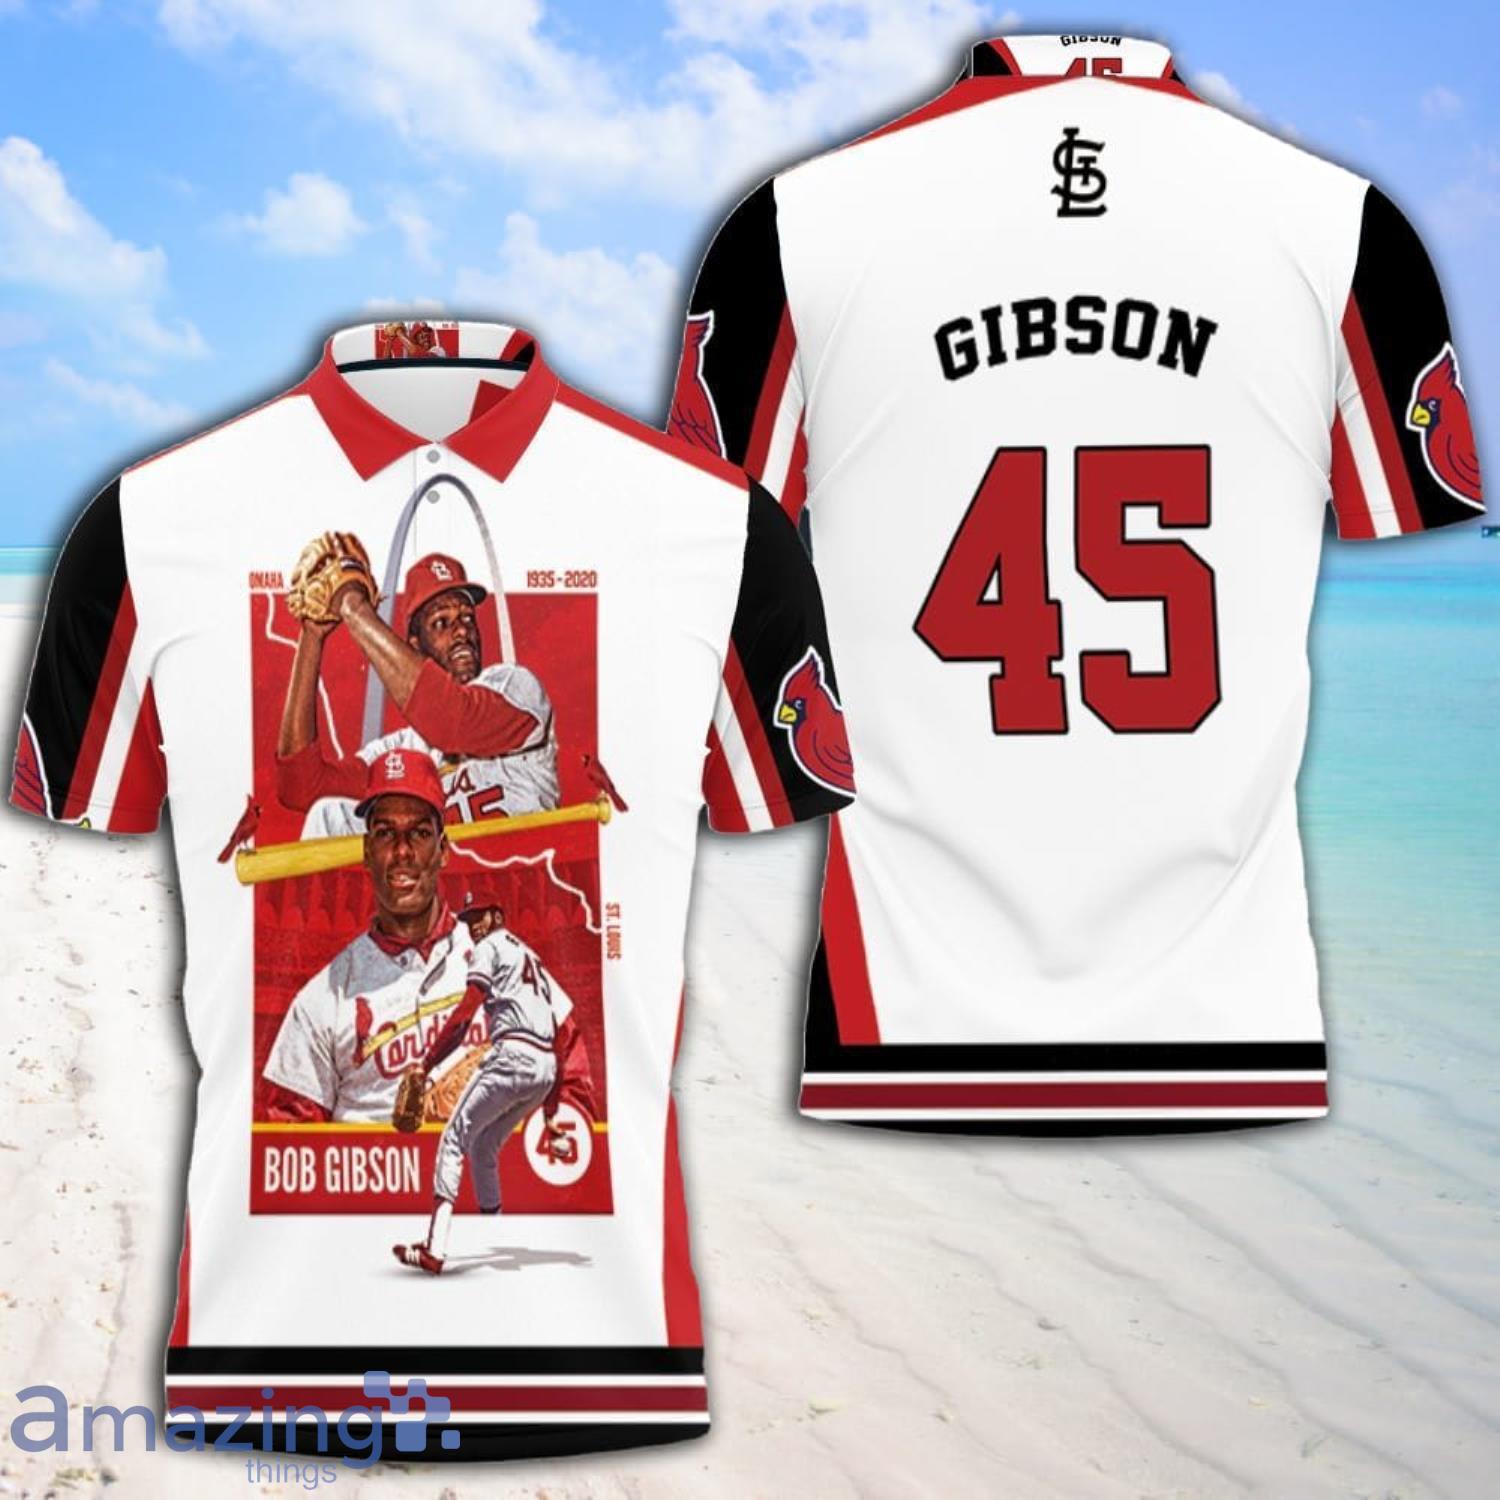 45 Gibson St Louis Cardinals Number Full Print Polo Shirt